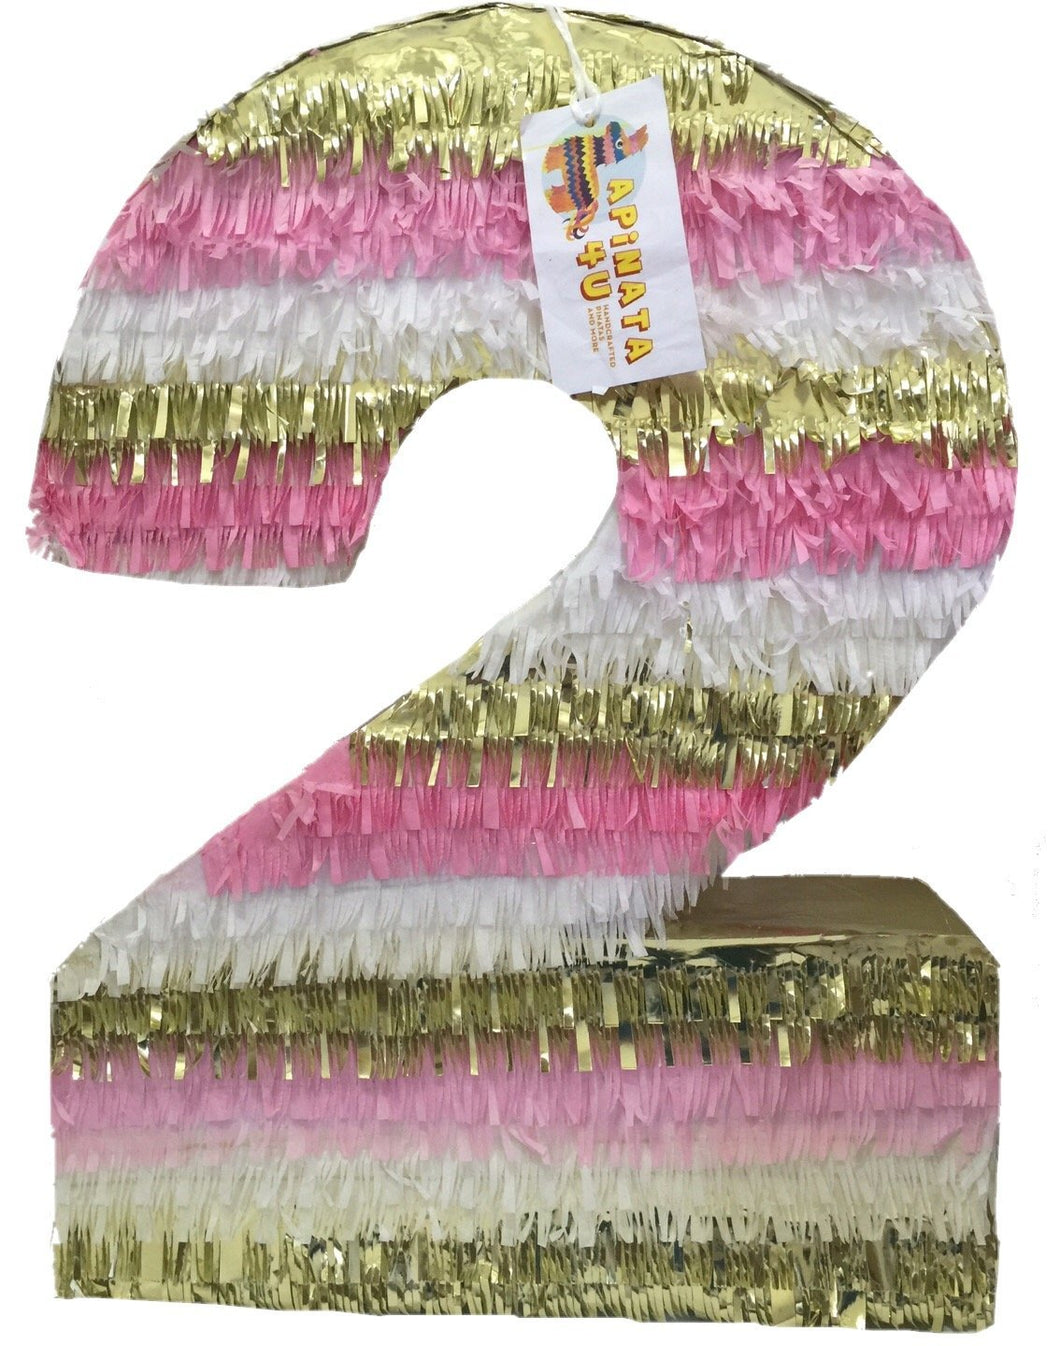 Large Pink Gold & White Number Two Pinata 24